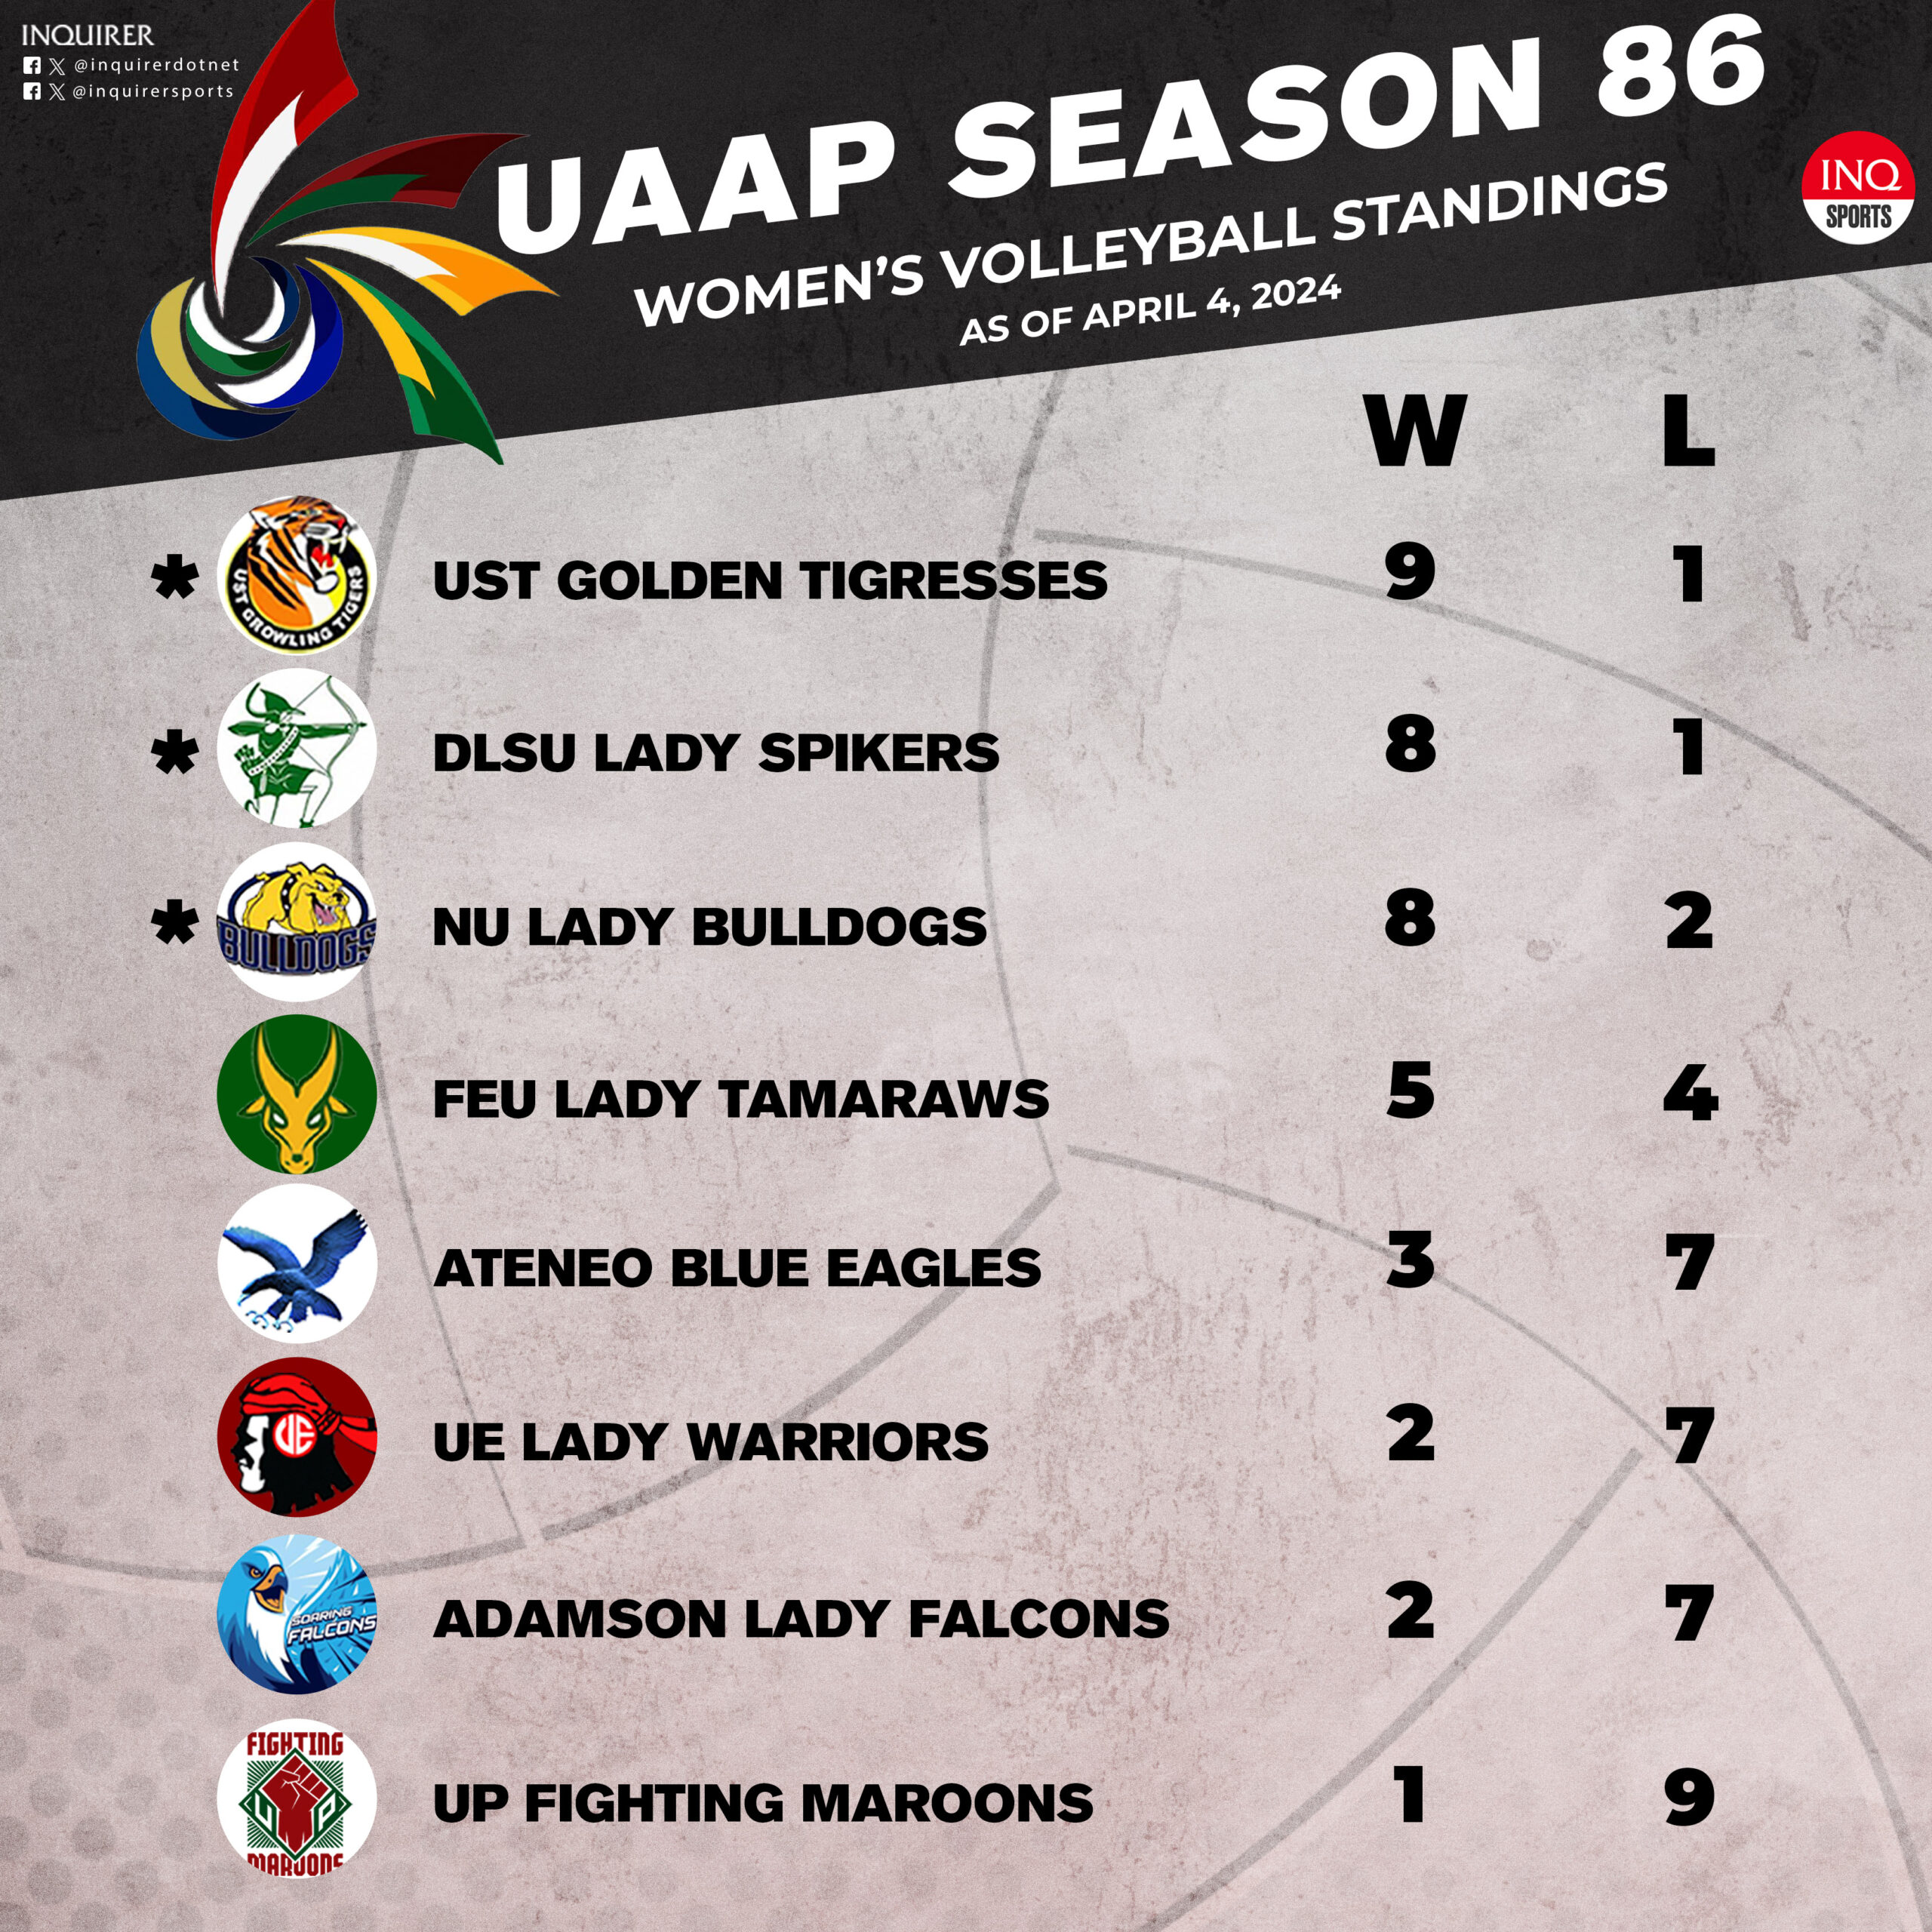 UAAP women's volleyball standings as of April 4